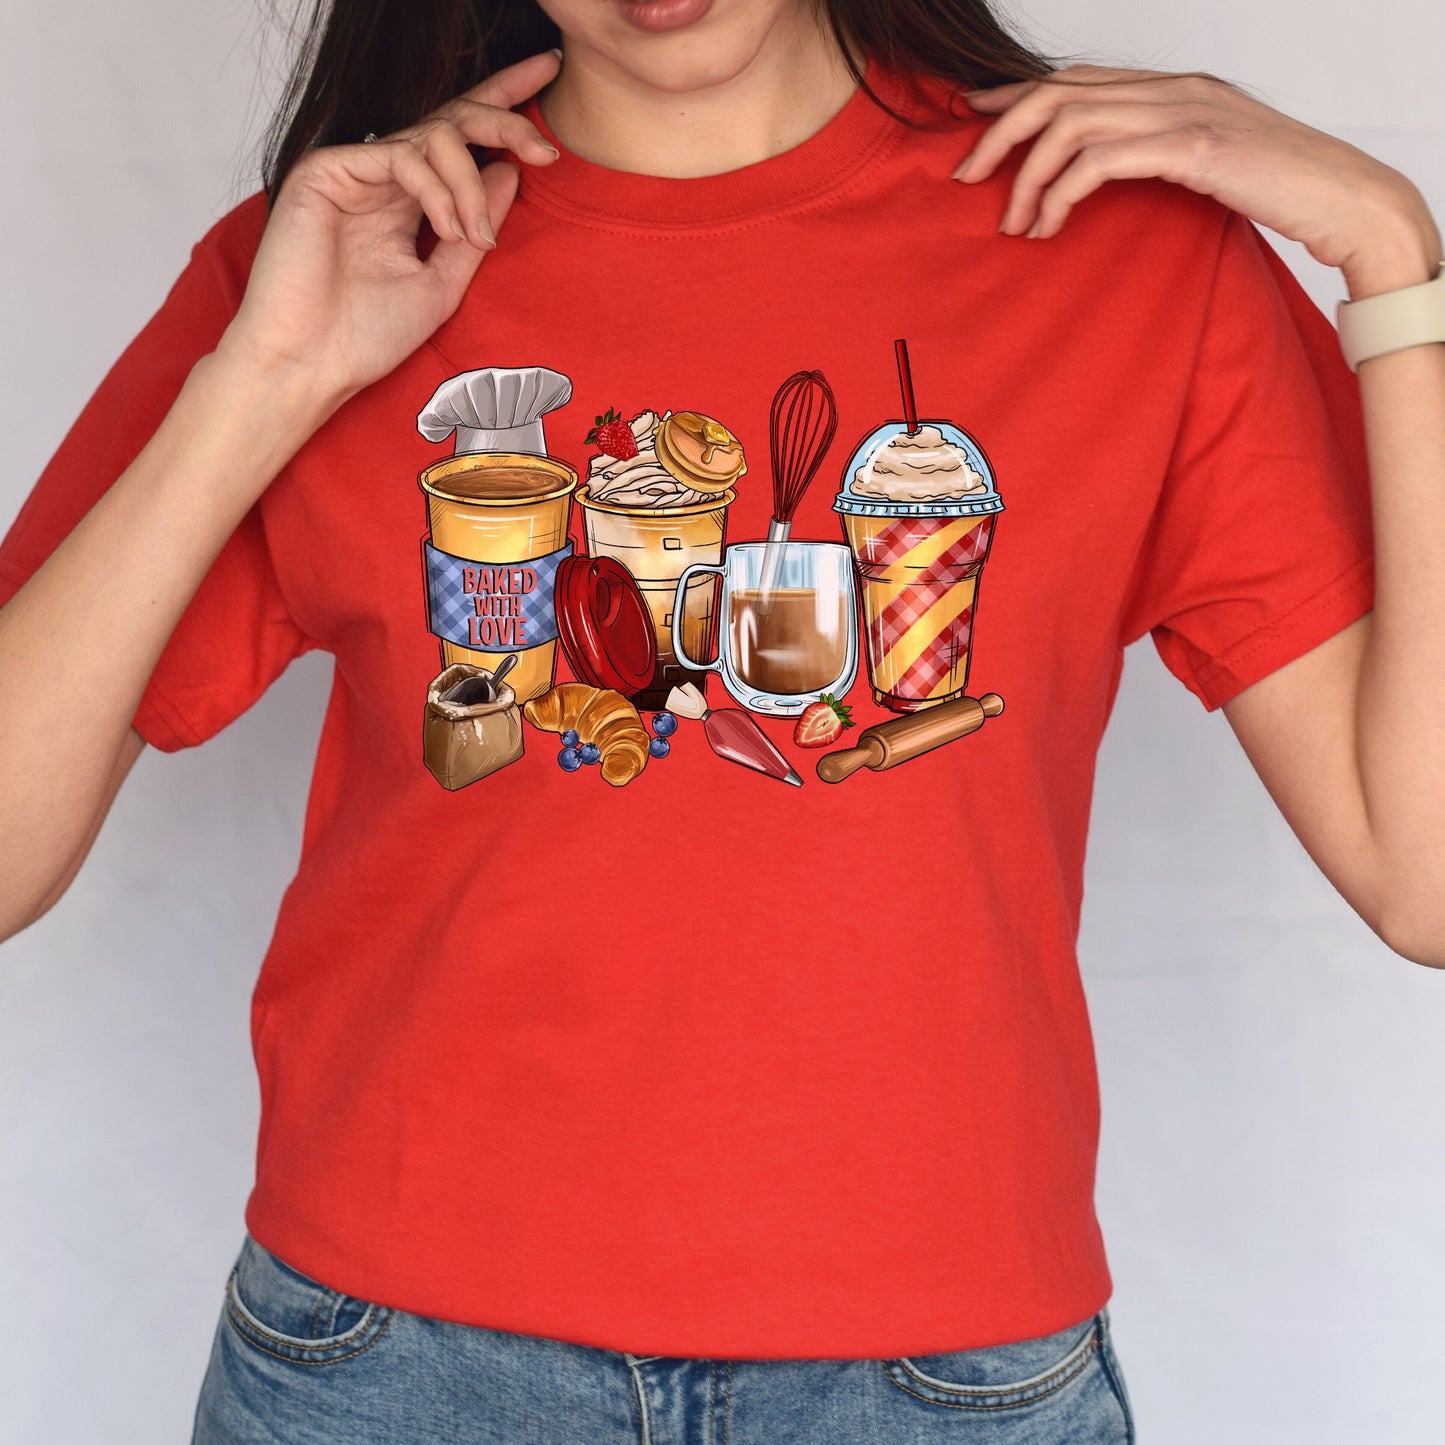 Bakery and coffee cups unisex tshirt baker tee S-5XL-Family-Gift-Planet